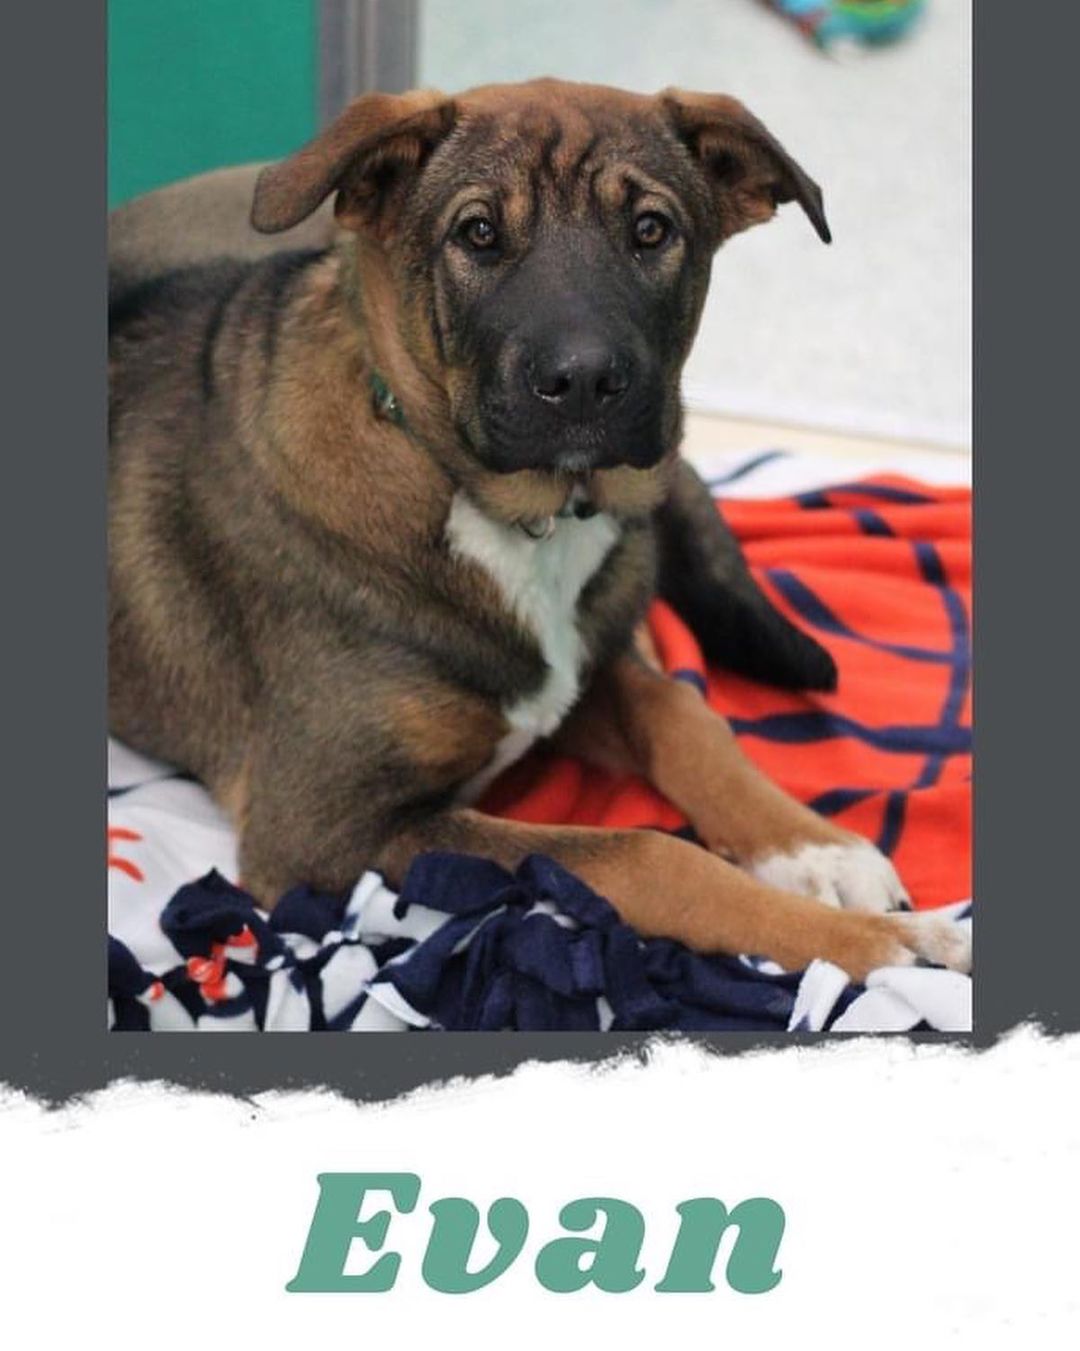 These young pups are looking for loving and patient foster or forever home! All of these 5-month-old Shar-Pei/Shepherd mixes are so sweet, but very timid when meeting people. They need to learn how to be pups! Call us at 218-568-7387 if you are interested.